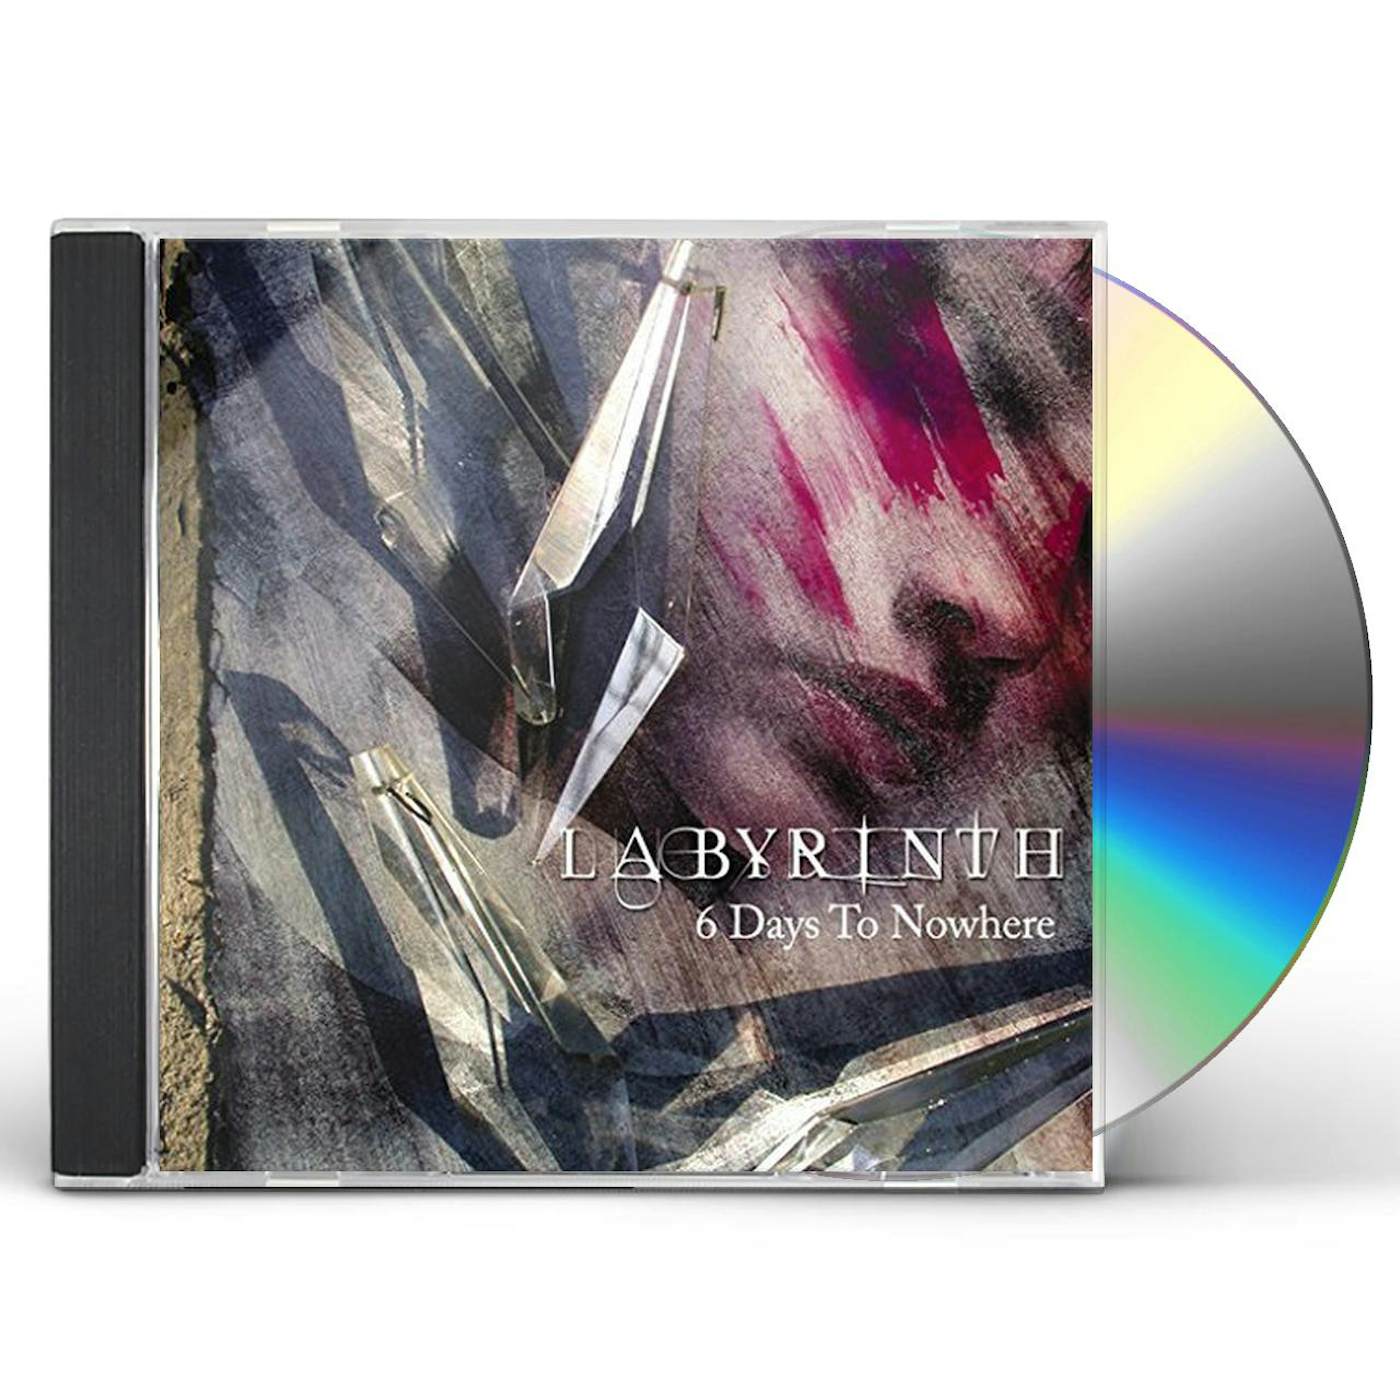 Labyrinth 6 DAYS TO NOWHERE CD